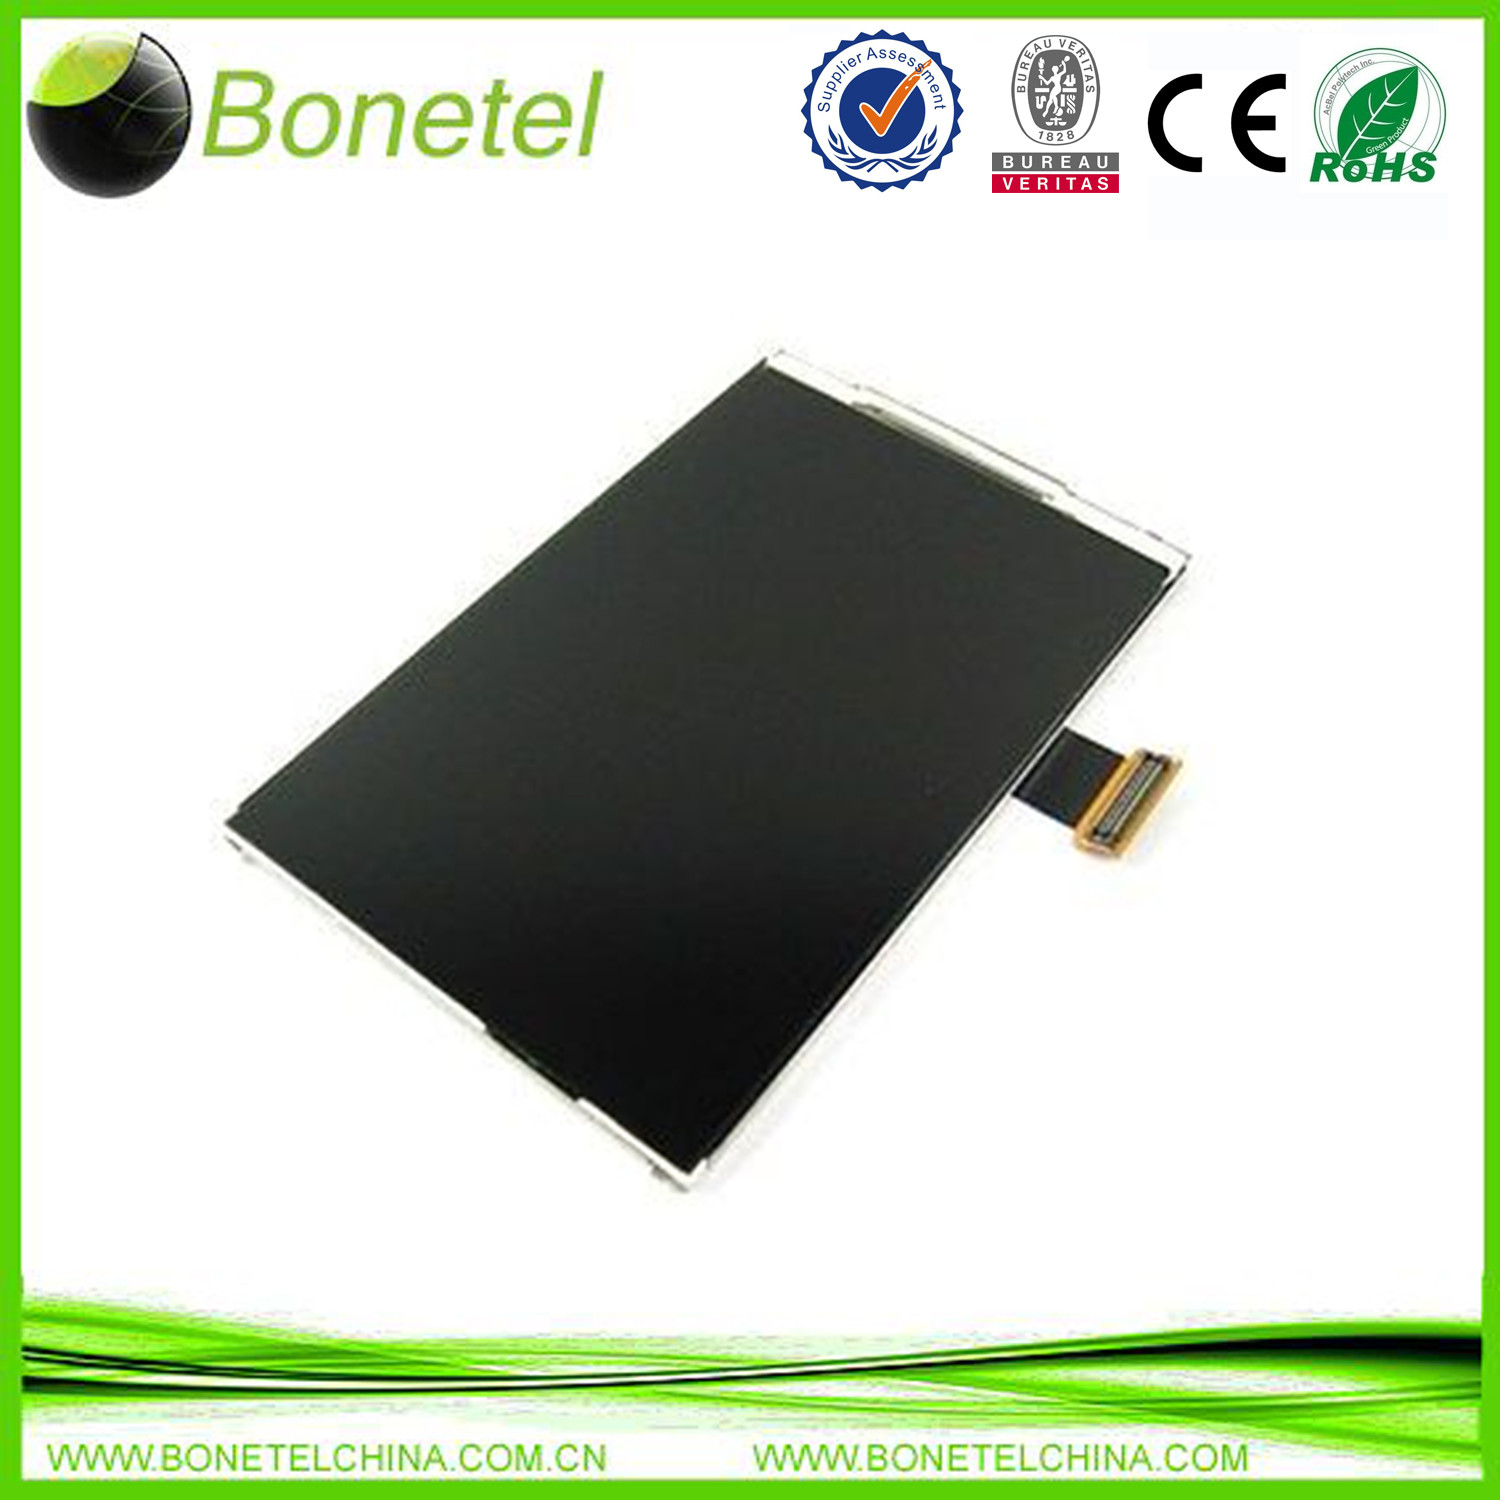 LCD Screen Display Replacement Repair Part for Samsung Galaxy Xcover GT-S5690